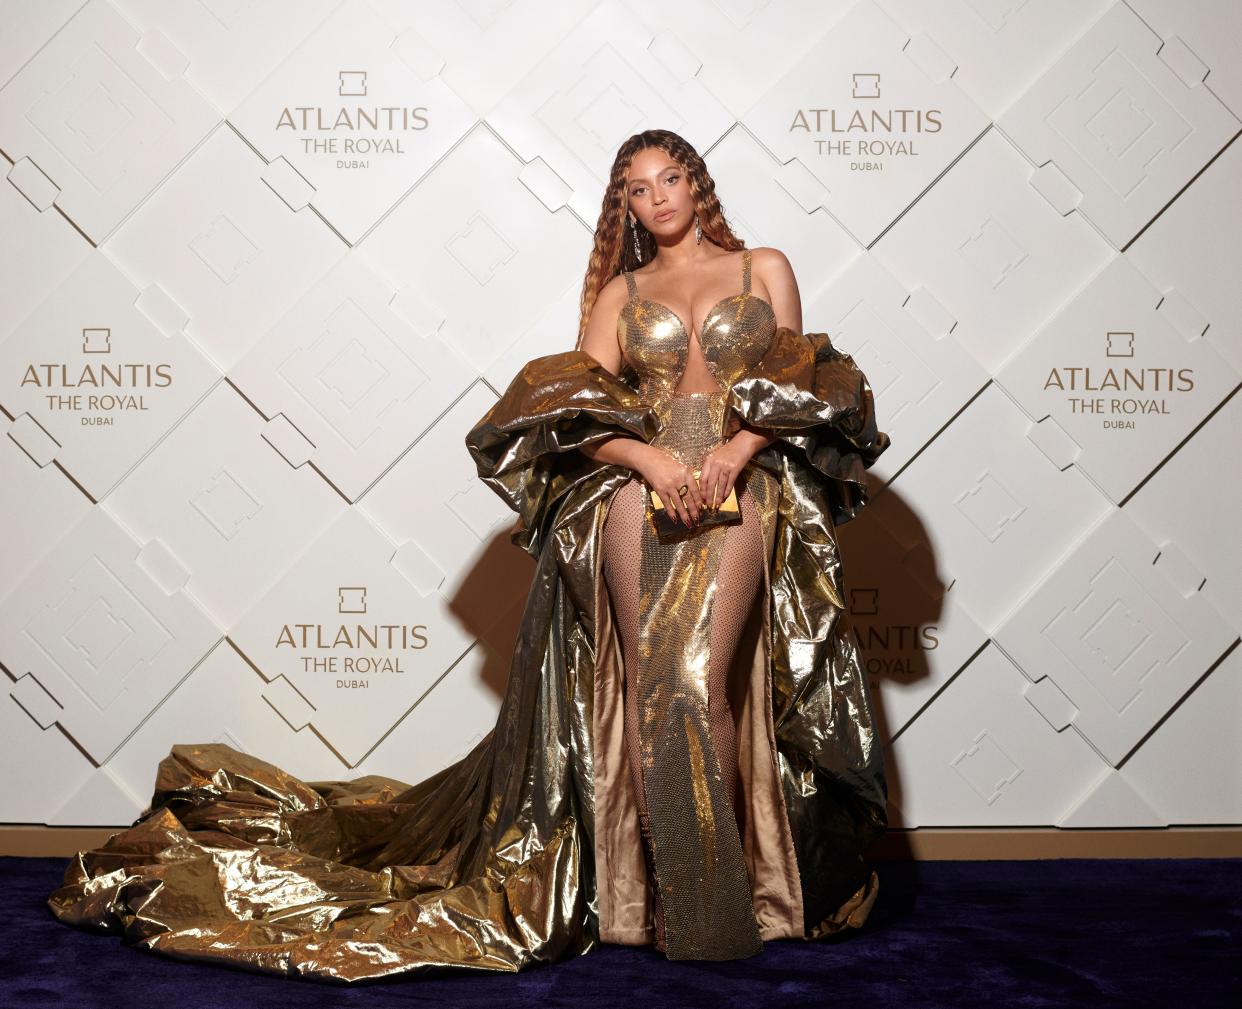 Beyoncé attends the Atlantis The Royal Grand Reveal Weekend on January 21, 2023, in Dubai, United Arab Emirates.